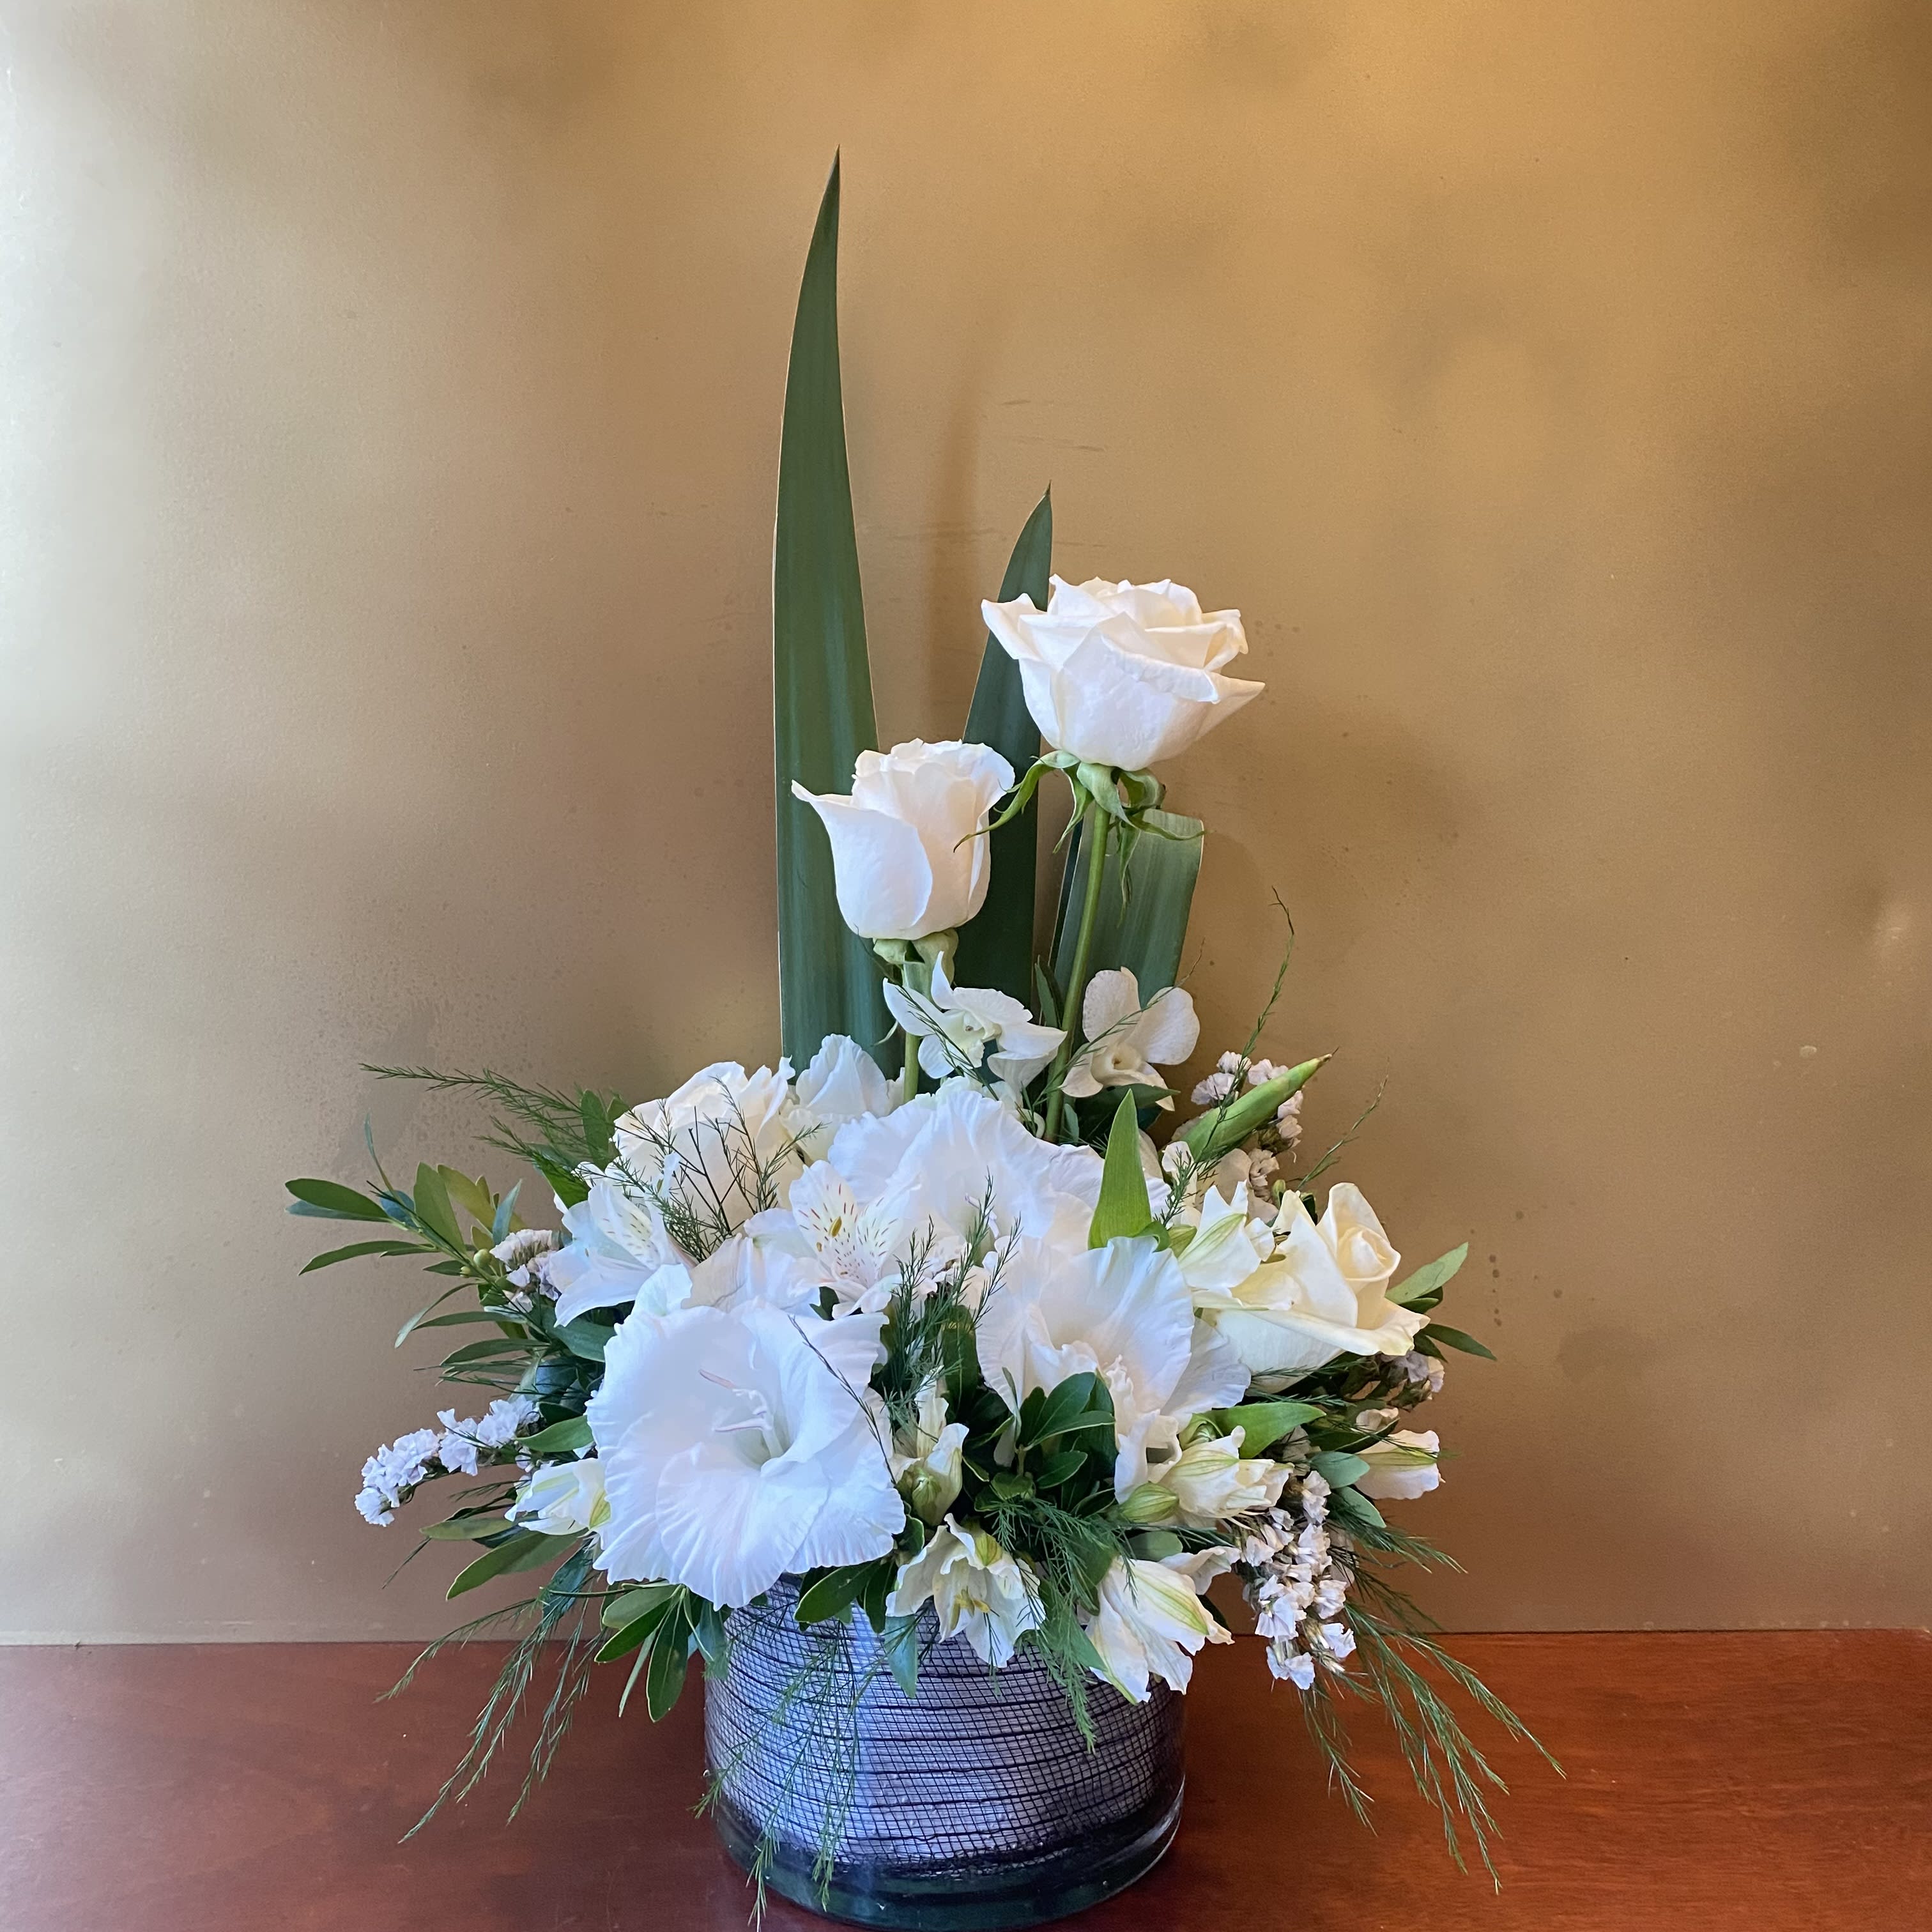 Classic All White Arrangment - White flowers have a certain timelessness and elegance, perfect for expressing your heartfelt condolences during times of sorrow.